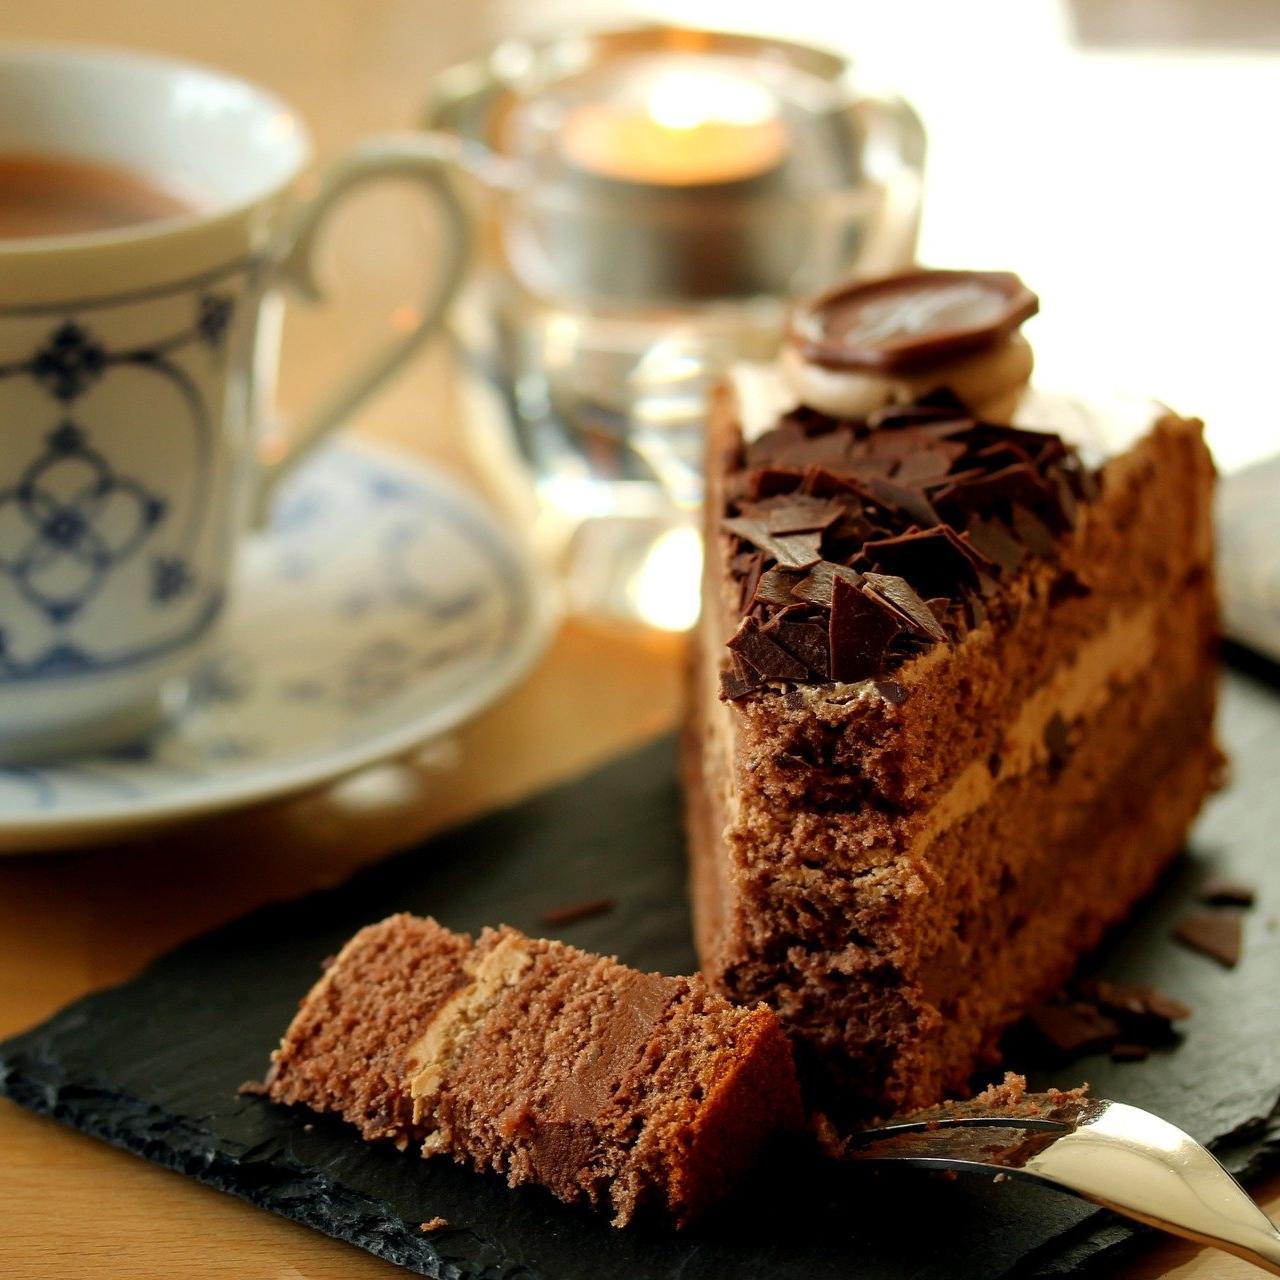 Slice of Chocolate Cake with a Cup of Tea